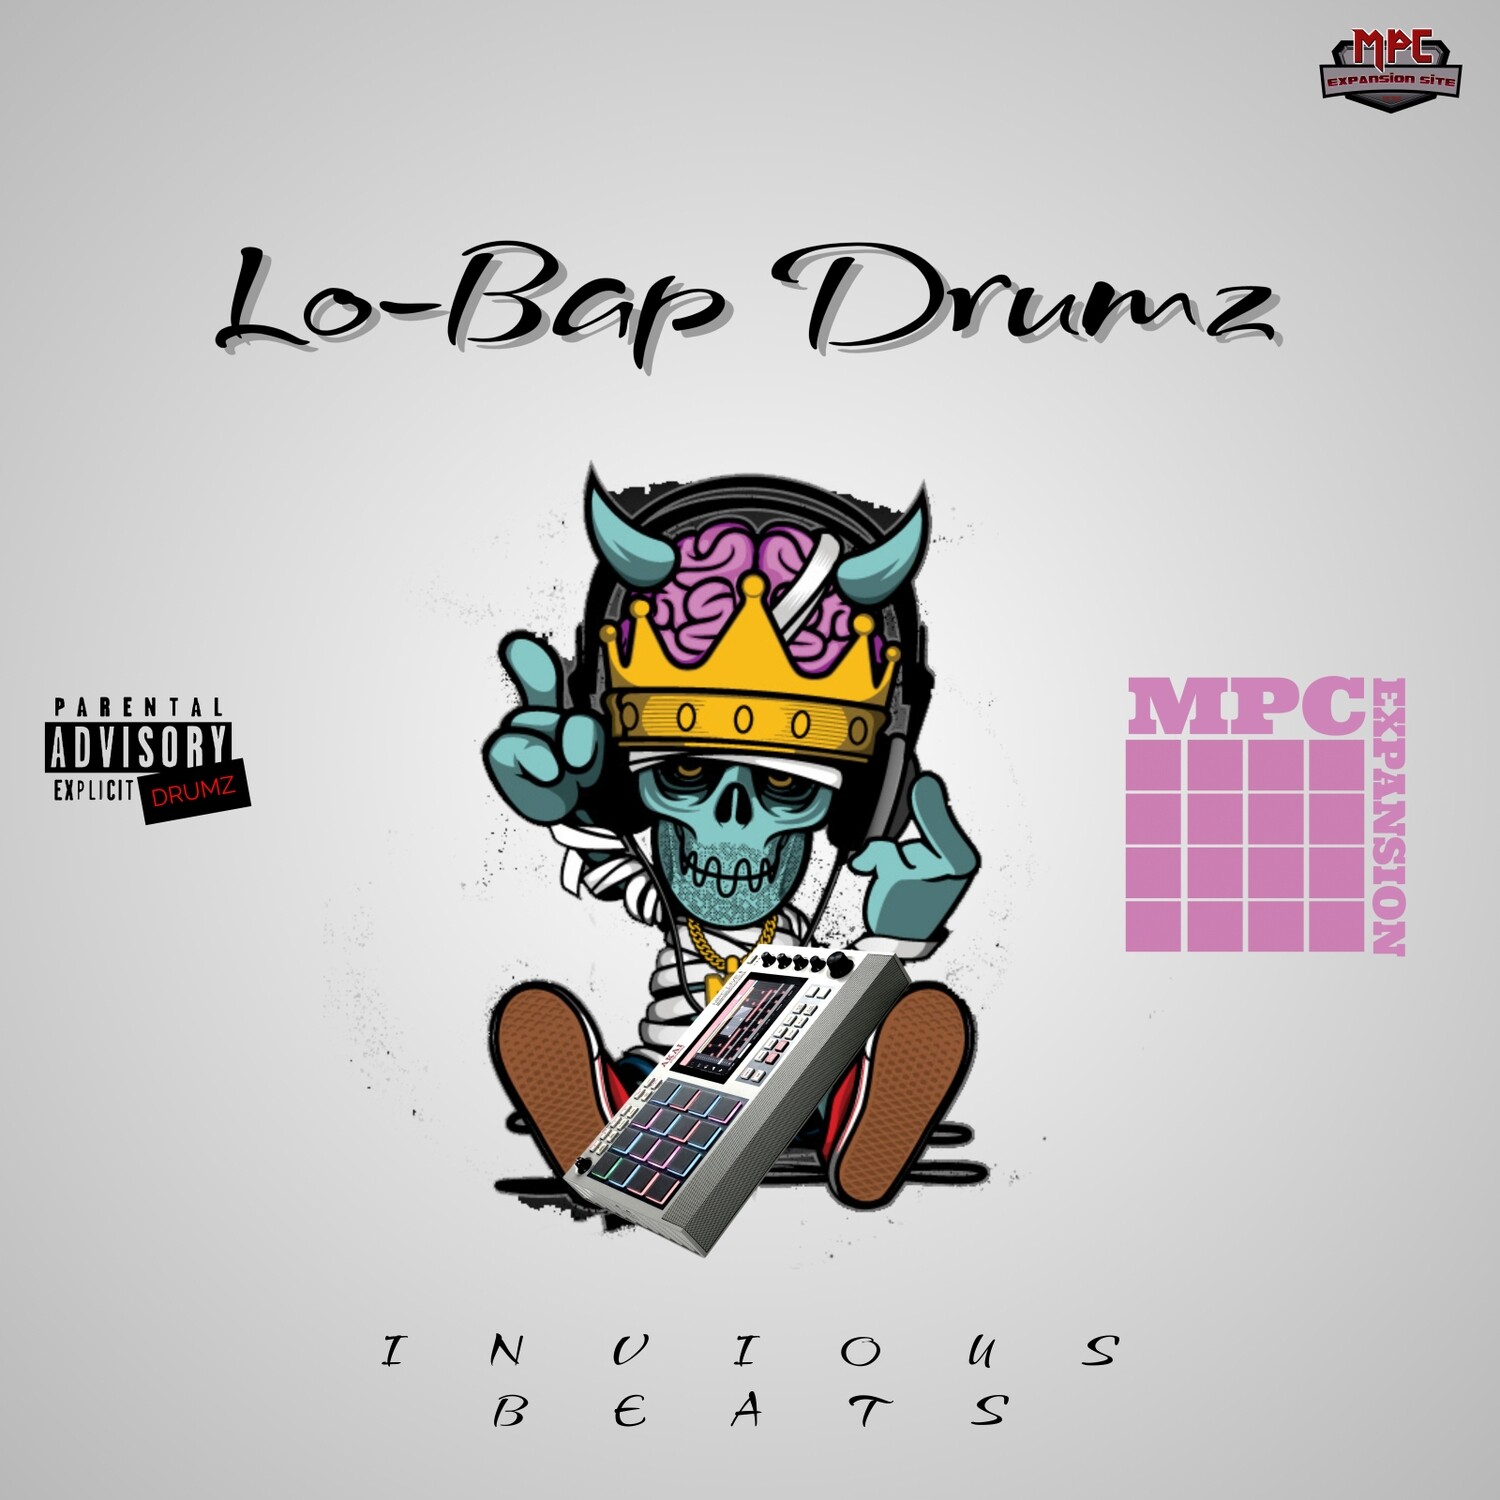 MPC EXPANSION 'LO-BAP DRUMZ' by INVIOUS